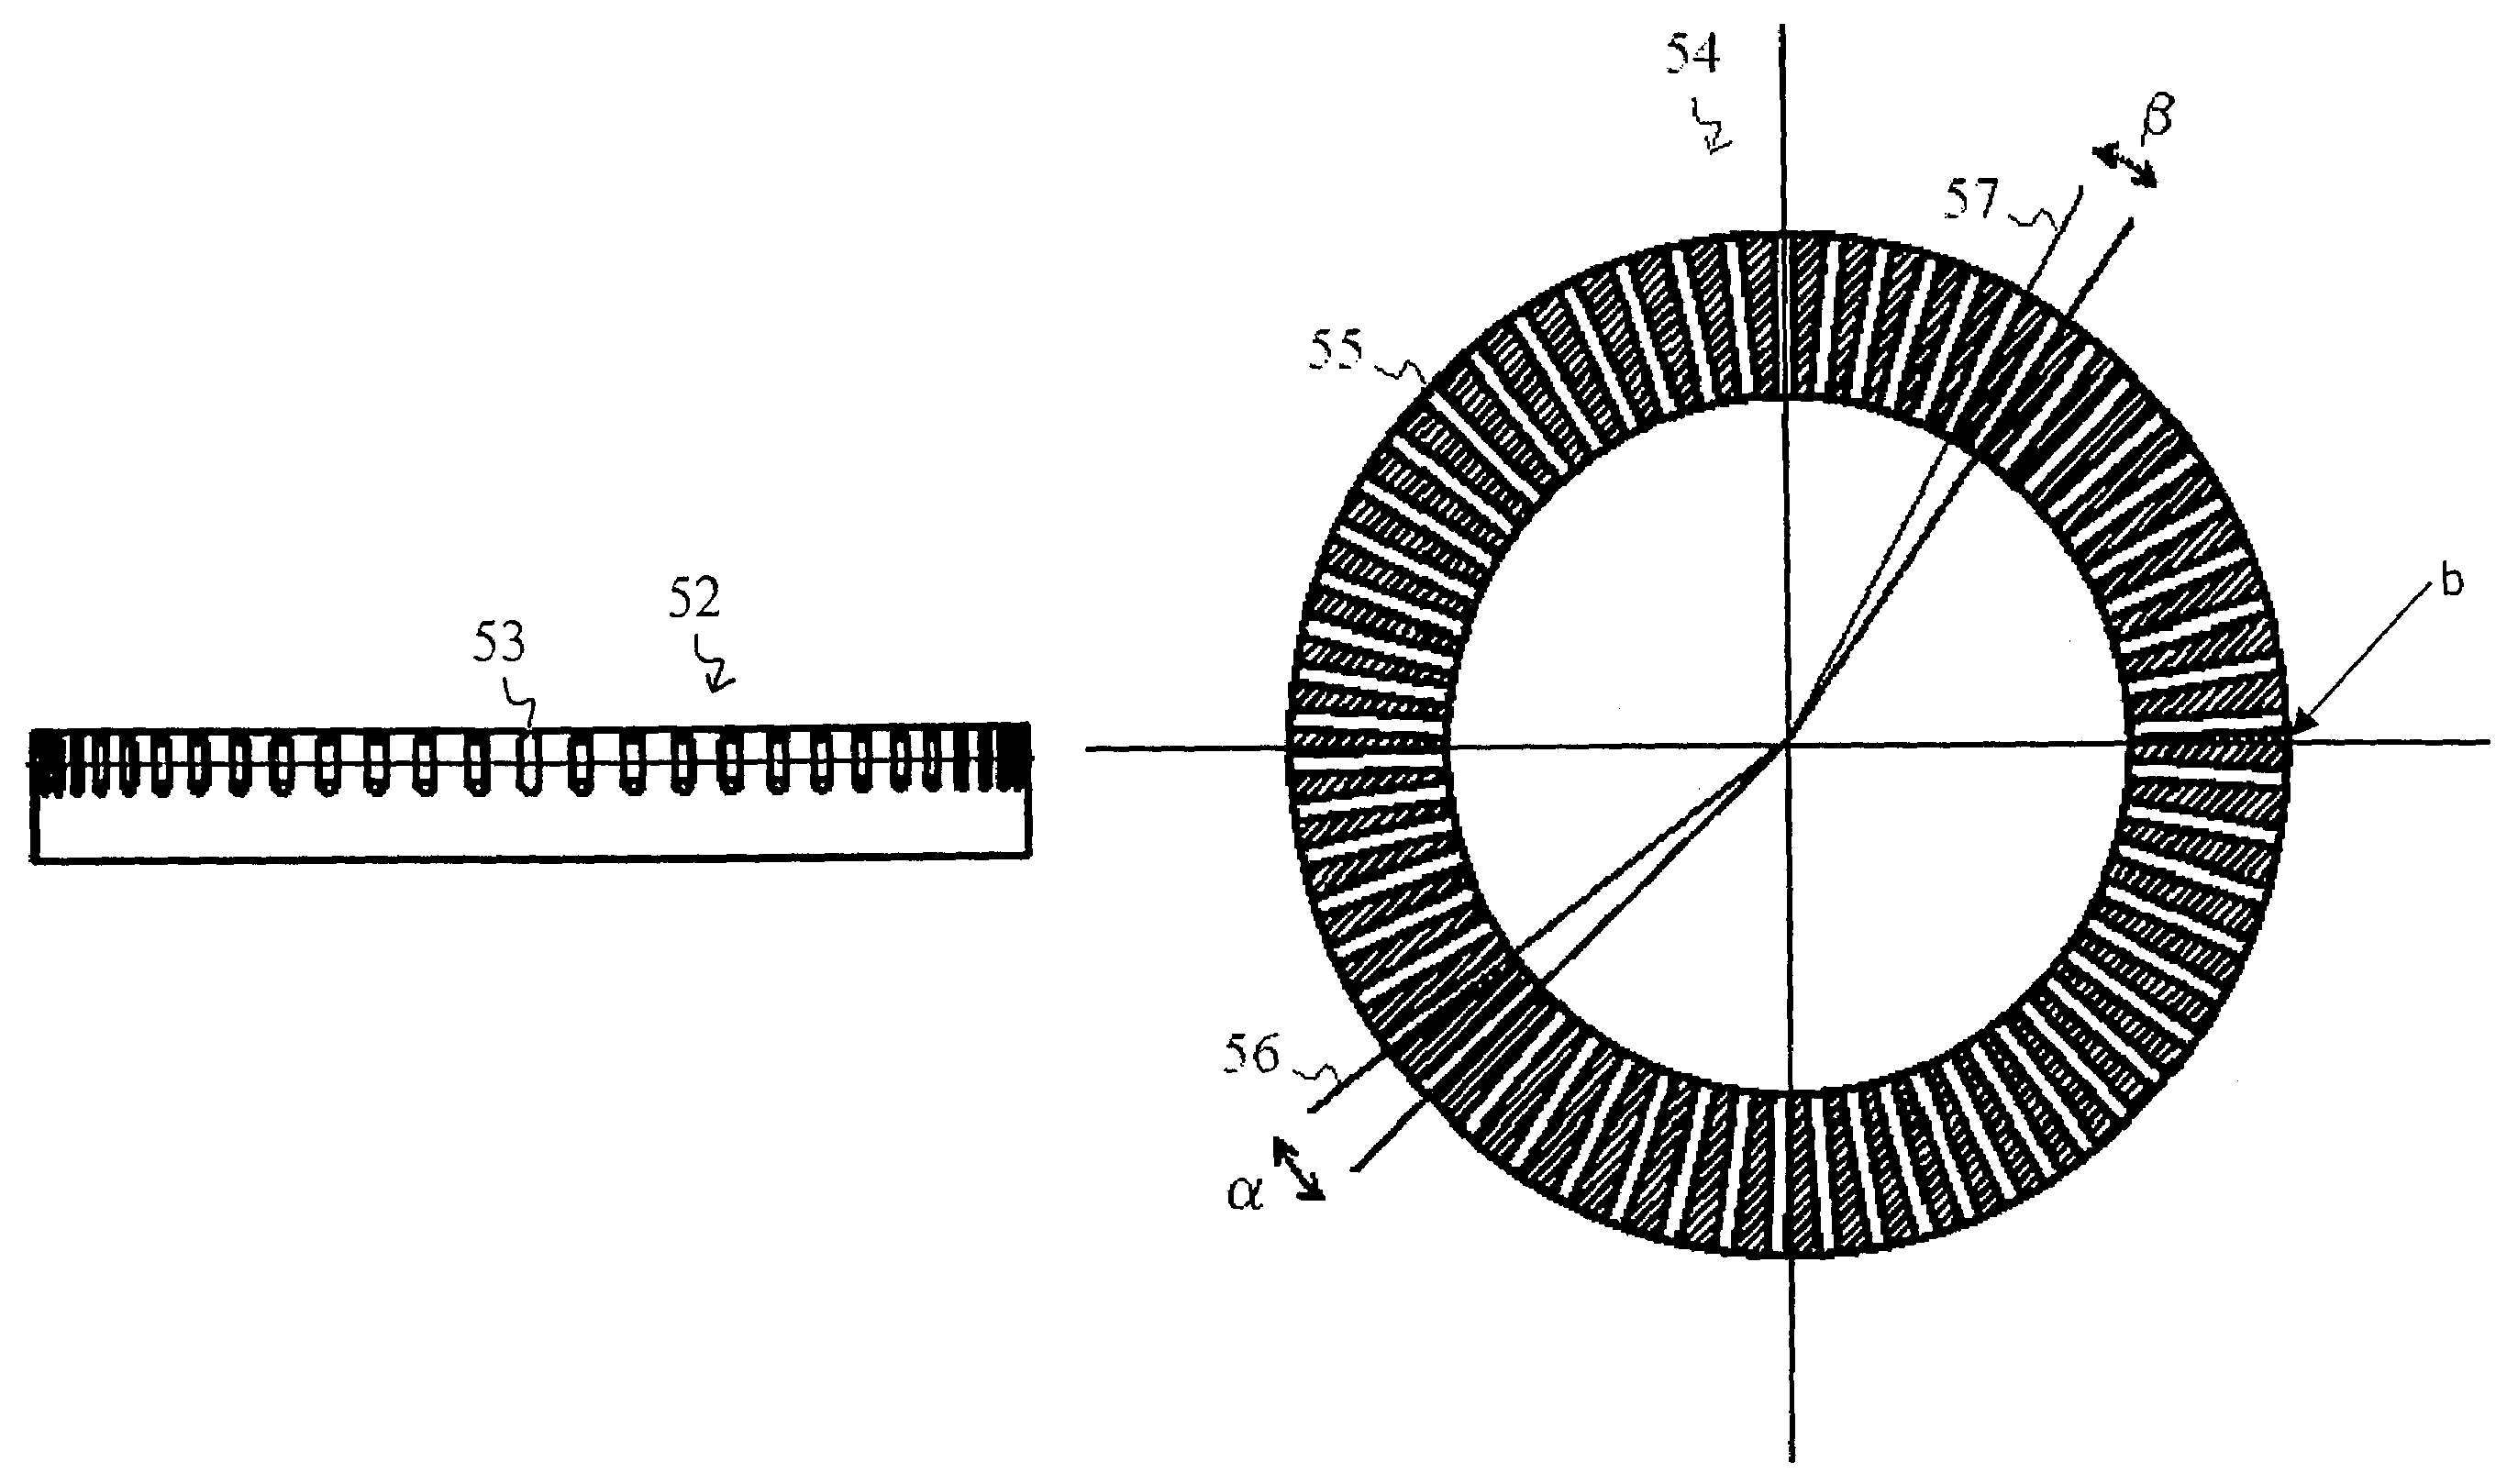 Reduction of harmonics in an electric motor